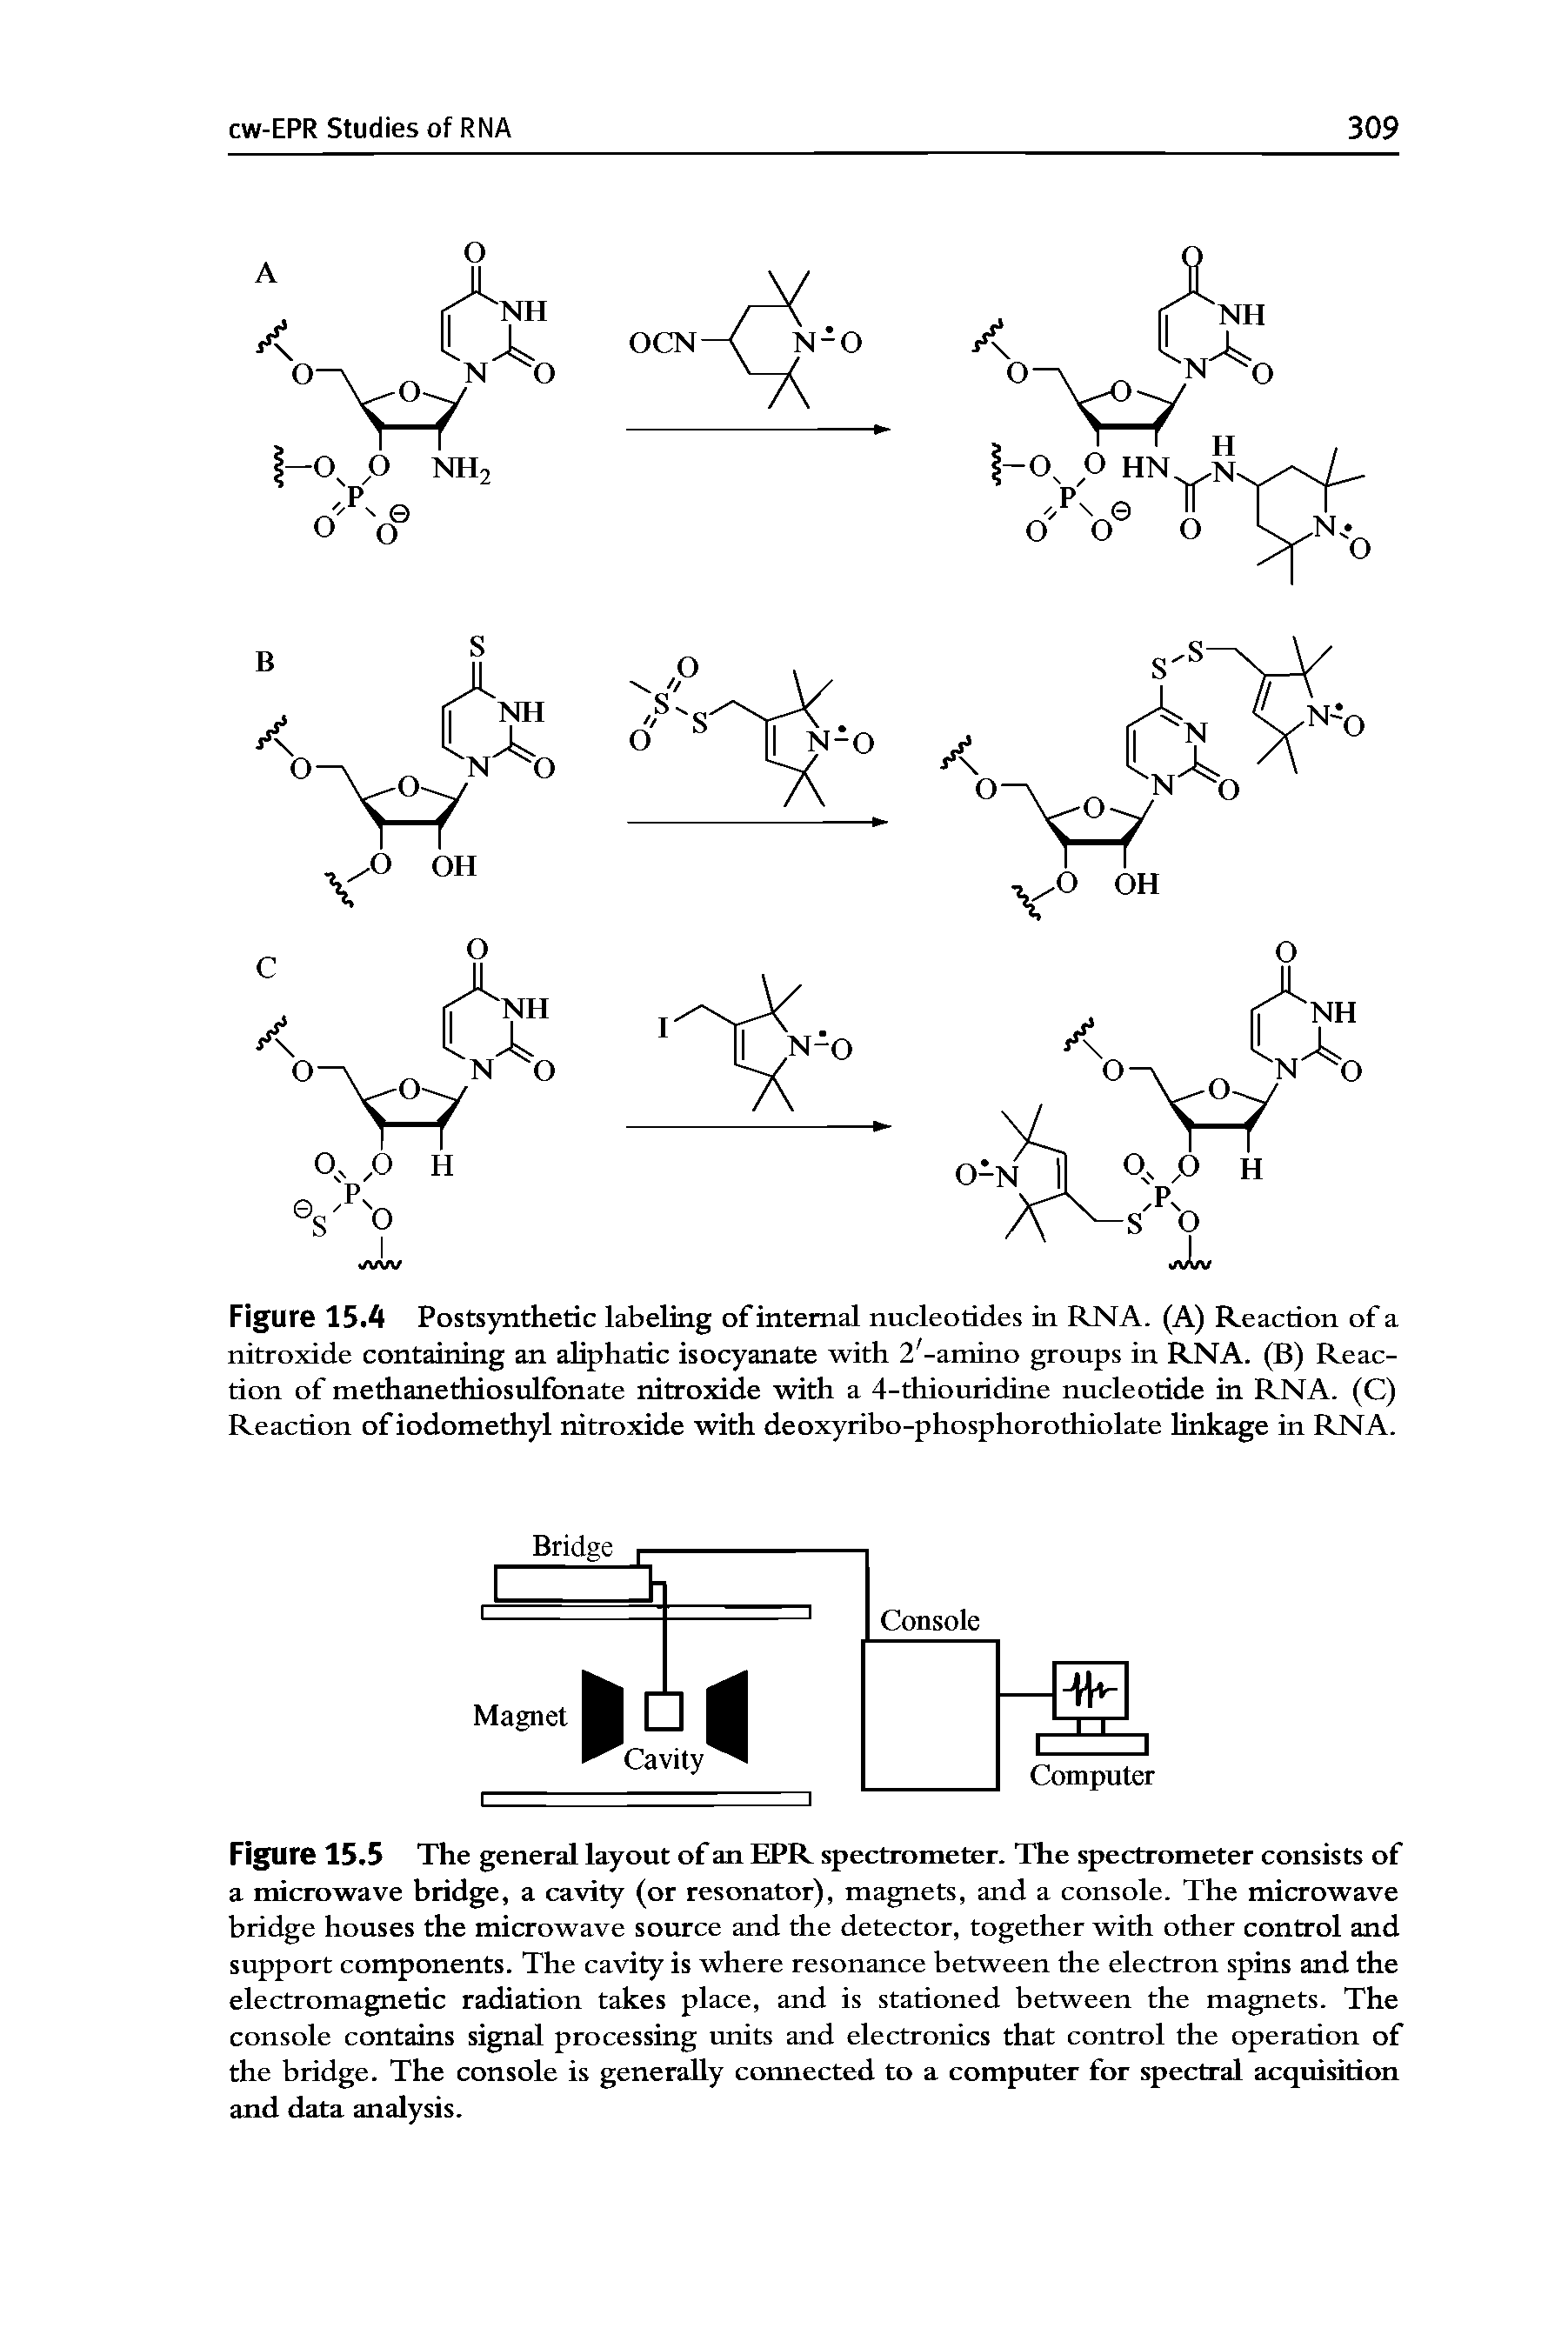 Figure 15.4 Postsynthetic labeling of internal nucleotides in RNA. (A) Reaction of a nitroxide containing an aliphatic isocyanate with 2,-amino groups in RNA. (B) Reaction of methanethiosulfonate nitroxide with a 4-thiouridine nucleotide in RNA. (C) Reaction ofiodomethyl nitroxide with deoxyribo-phosphorothiolate linkage in RNA.